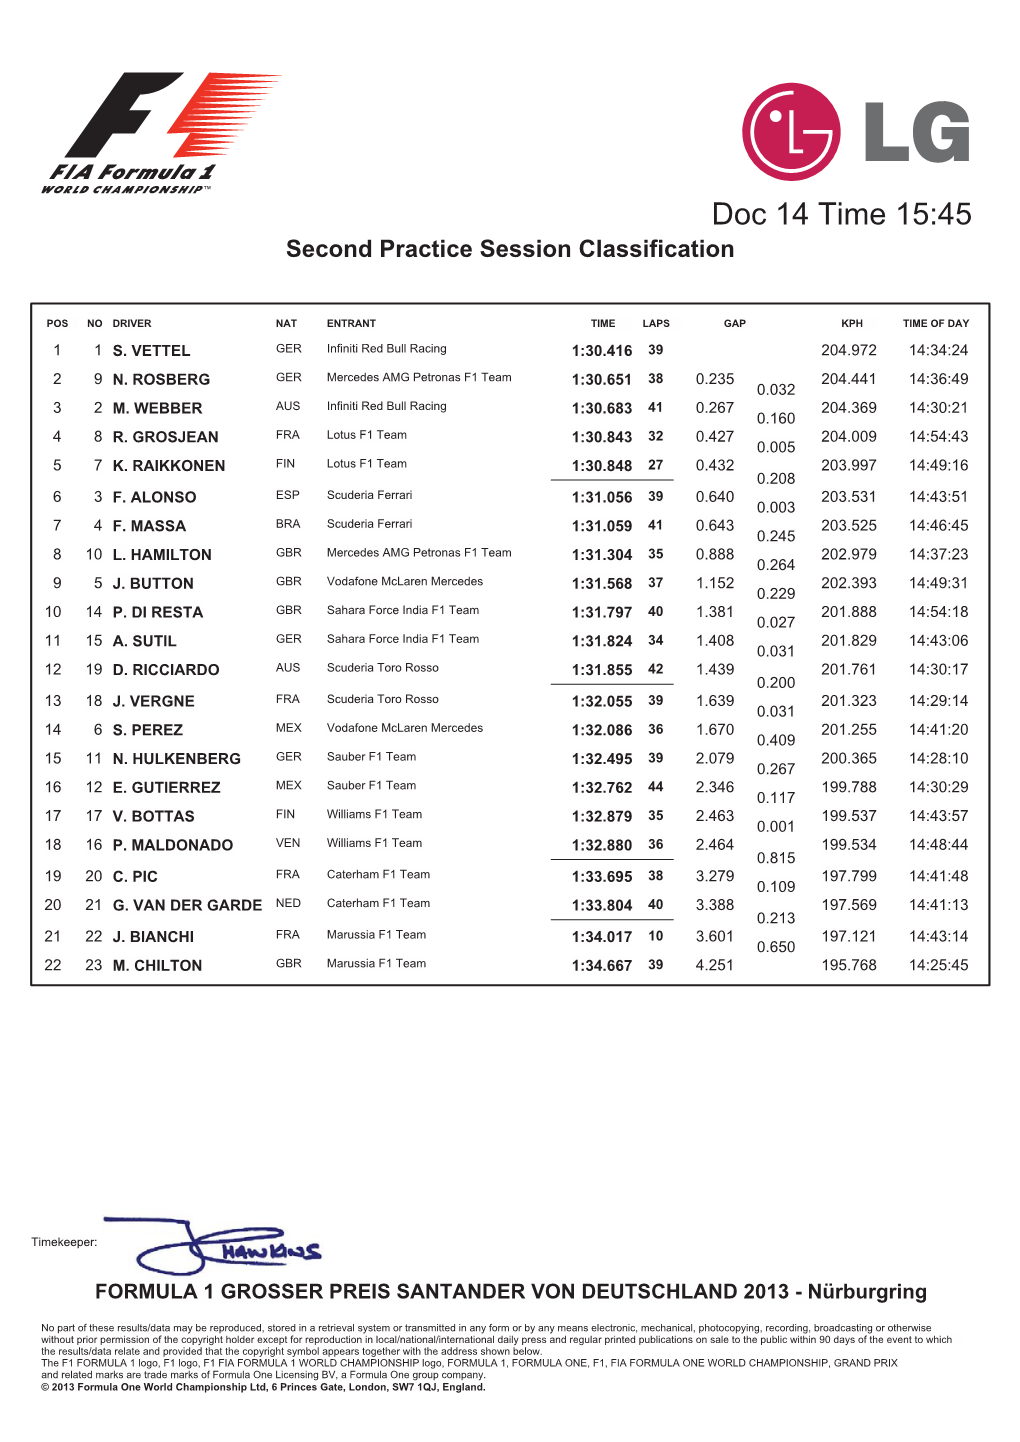 Second Practice Session Classification